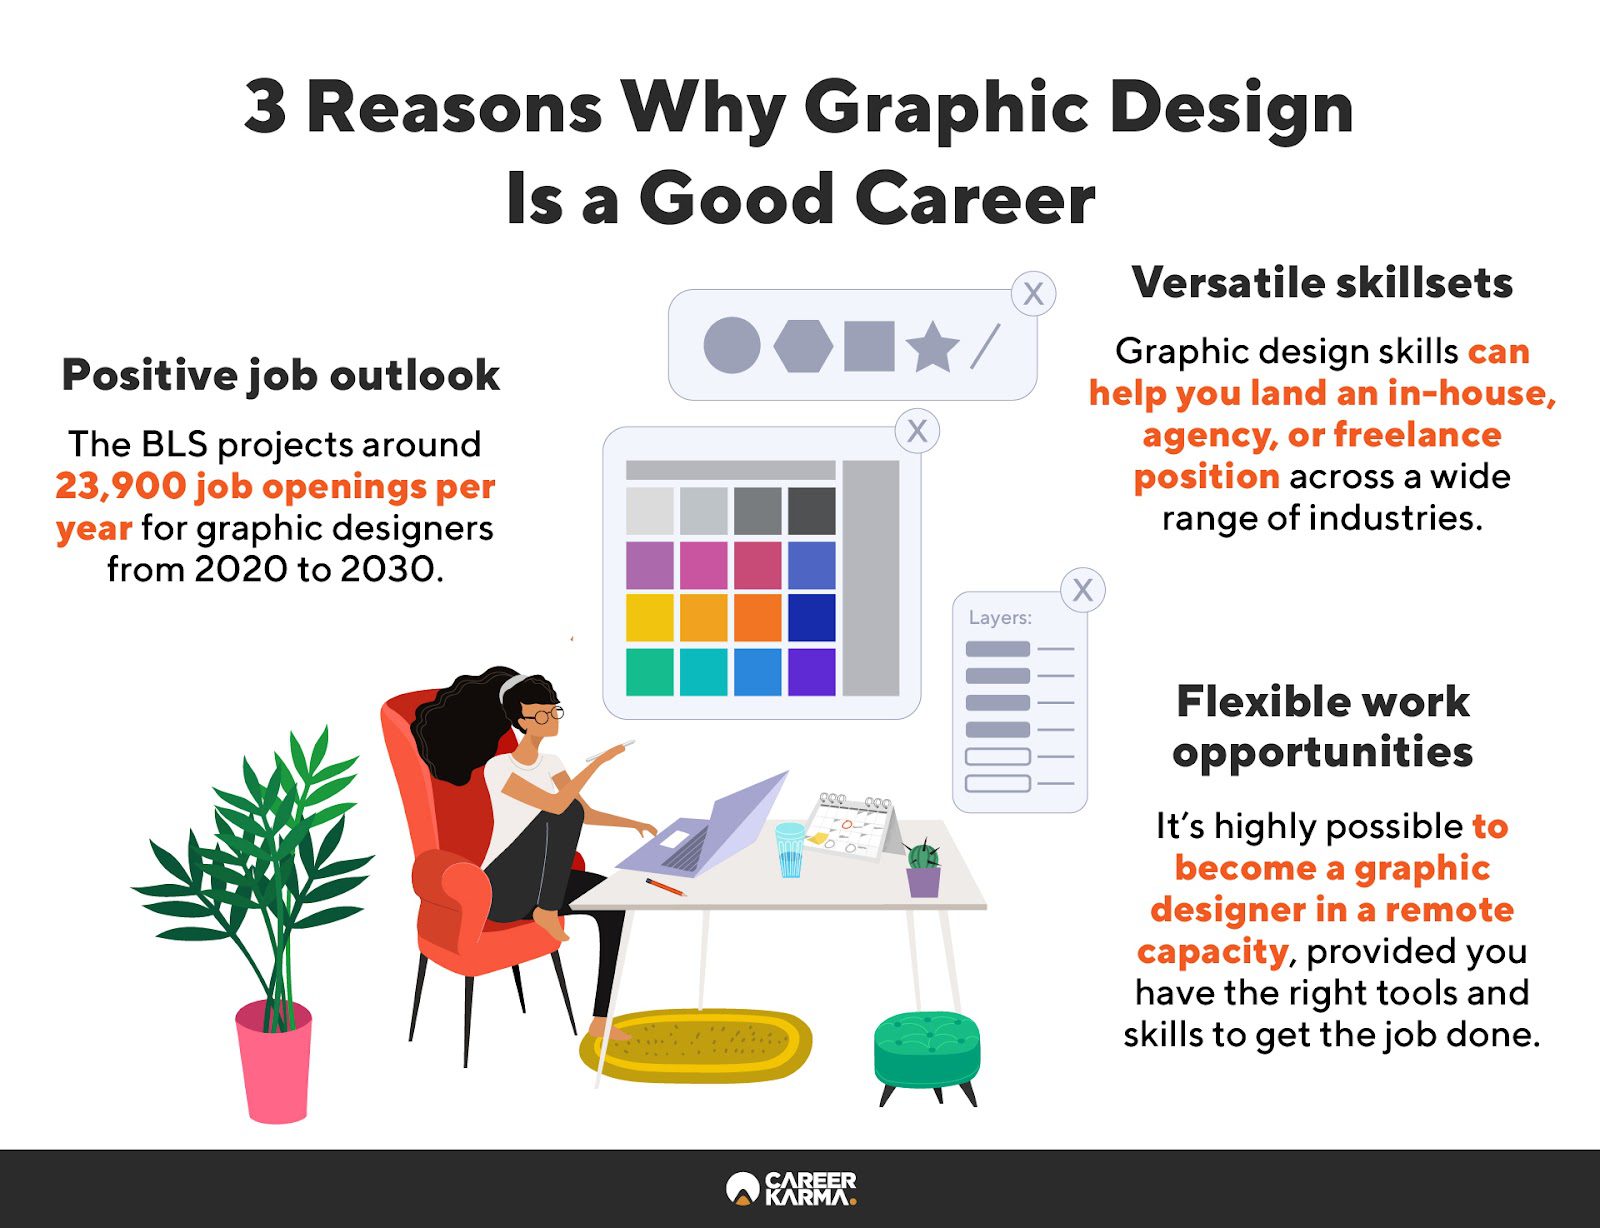 An infographic highlighting three reasons to pursue a career in graphic design